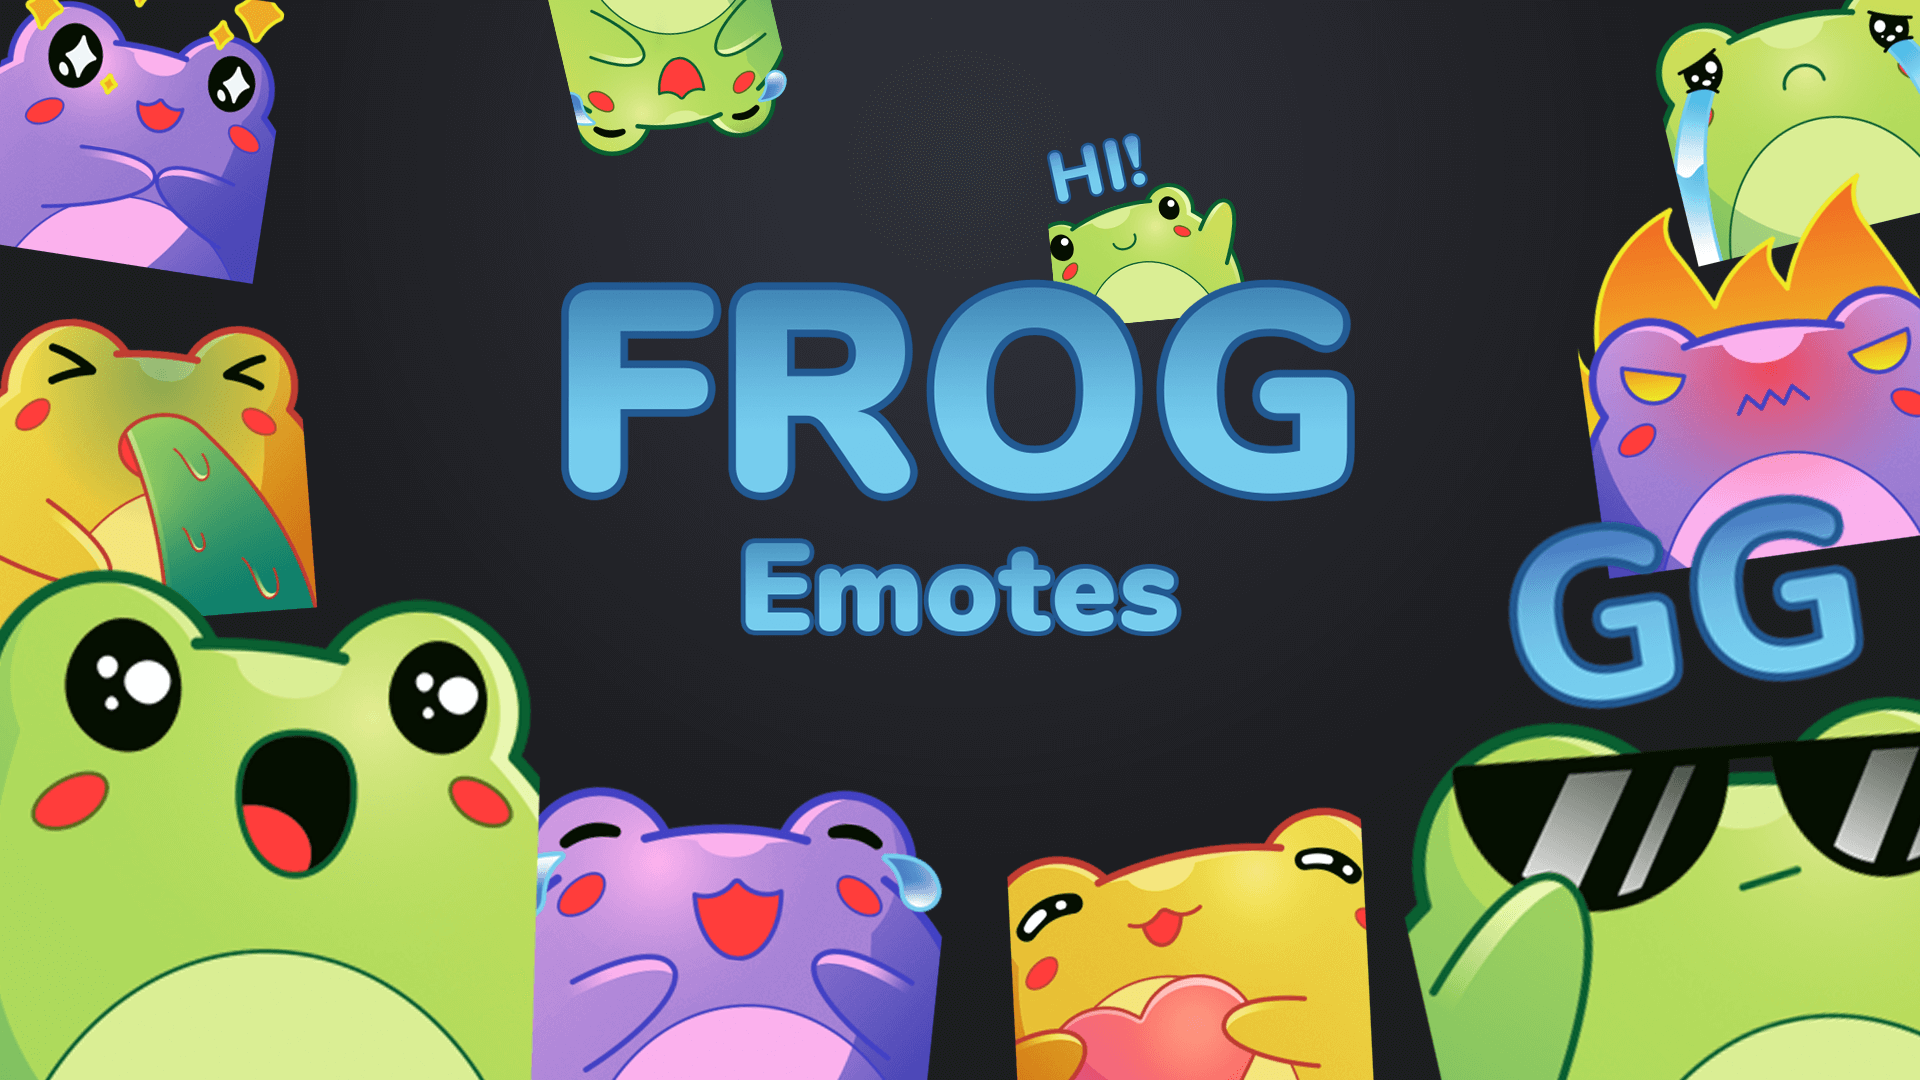 Frog Custom Emotes for Twitch, Youtube and Discord